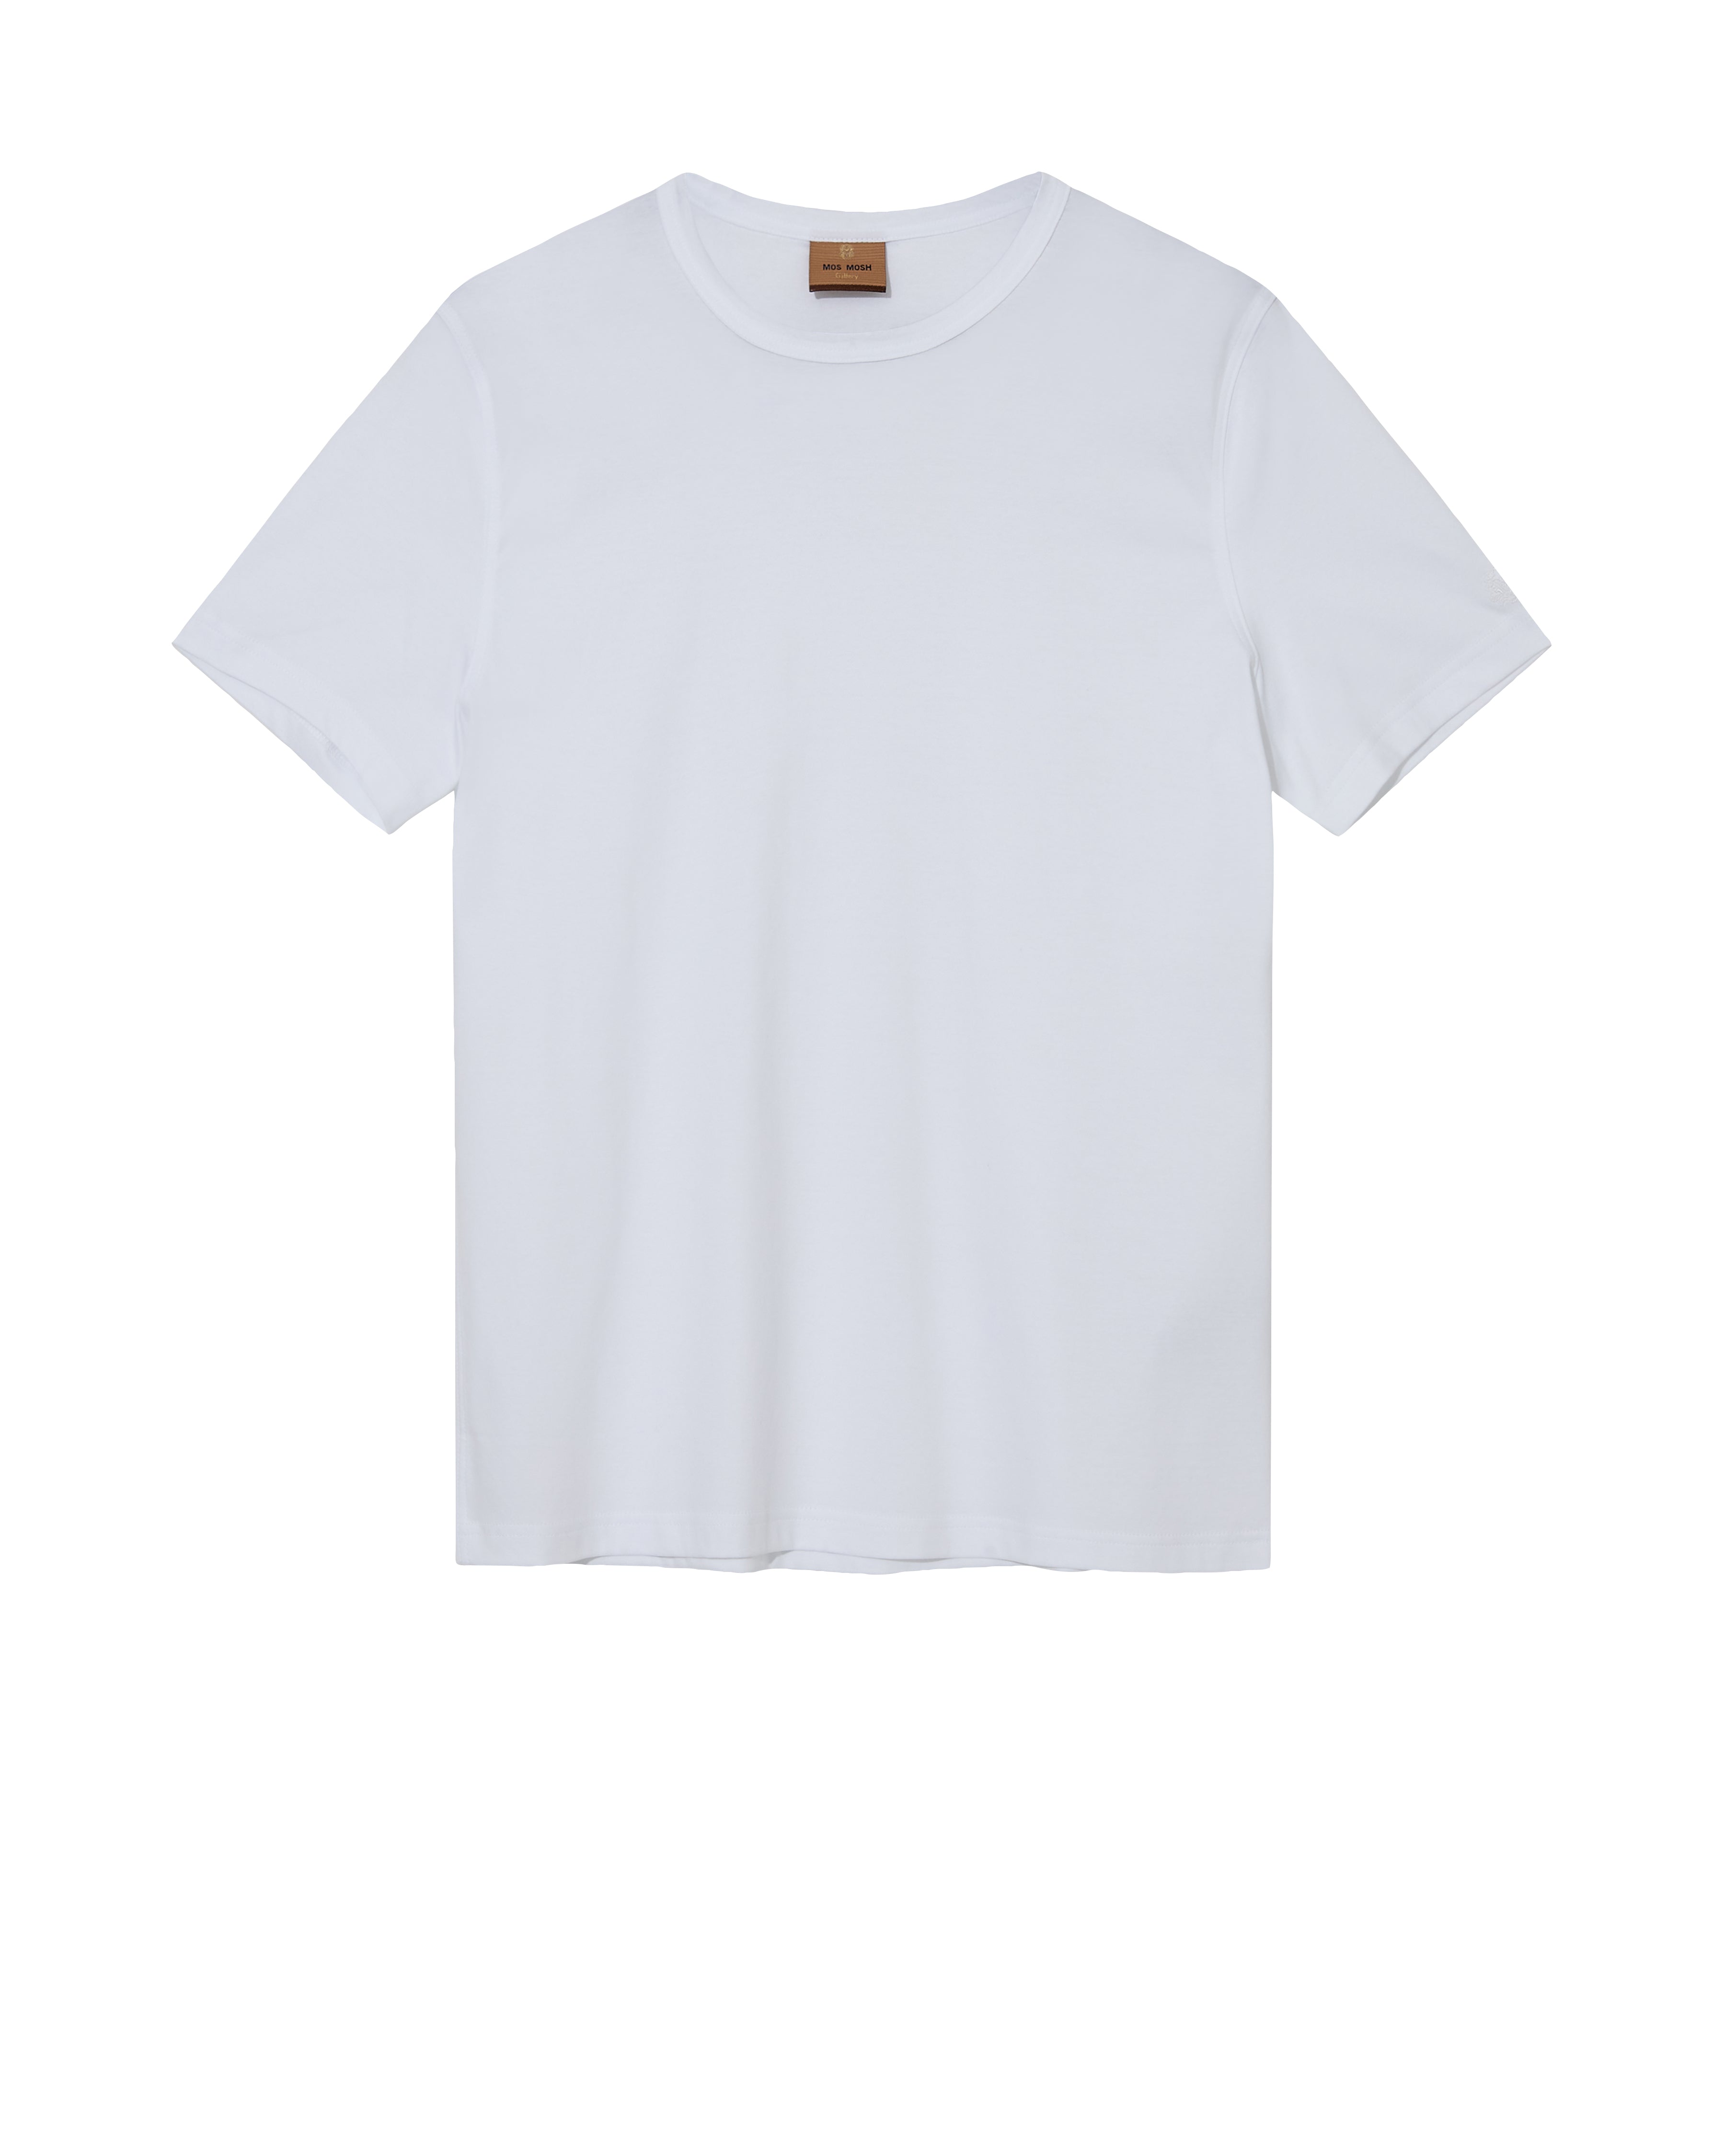 Perry Crunch O-ss Tee - White